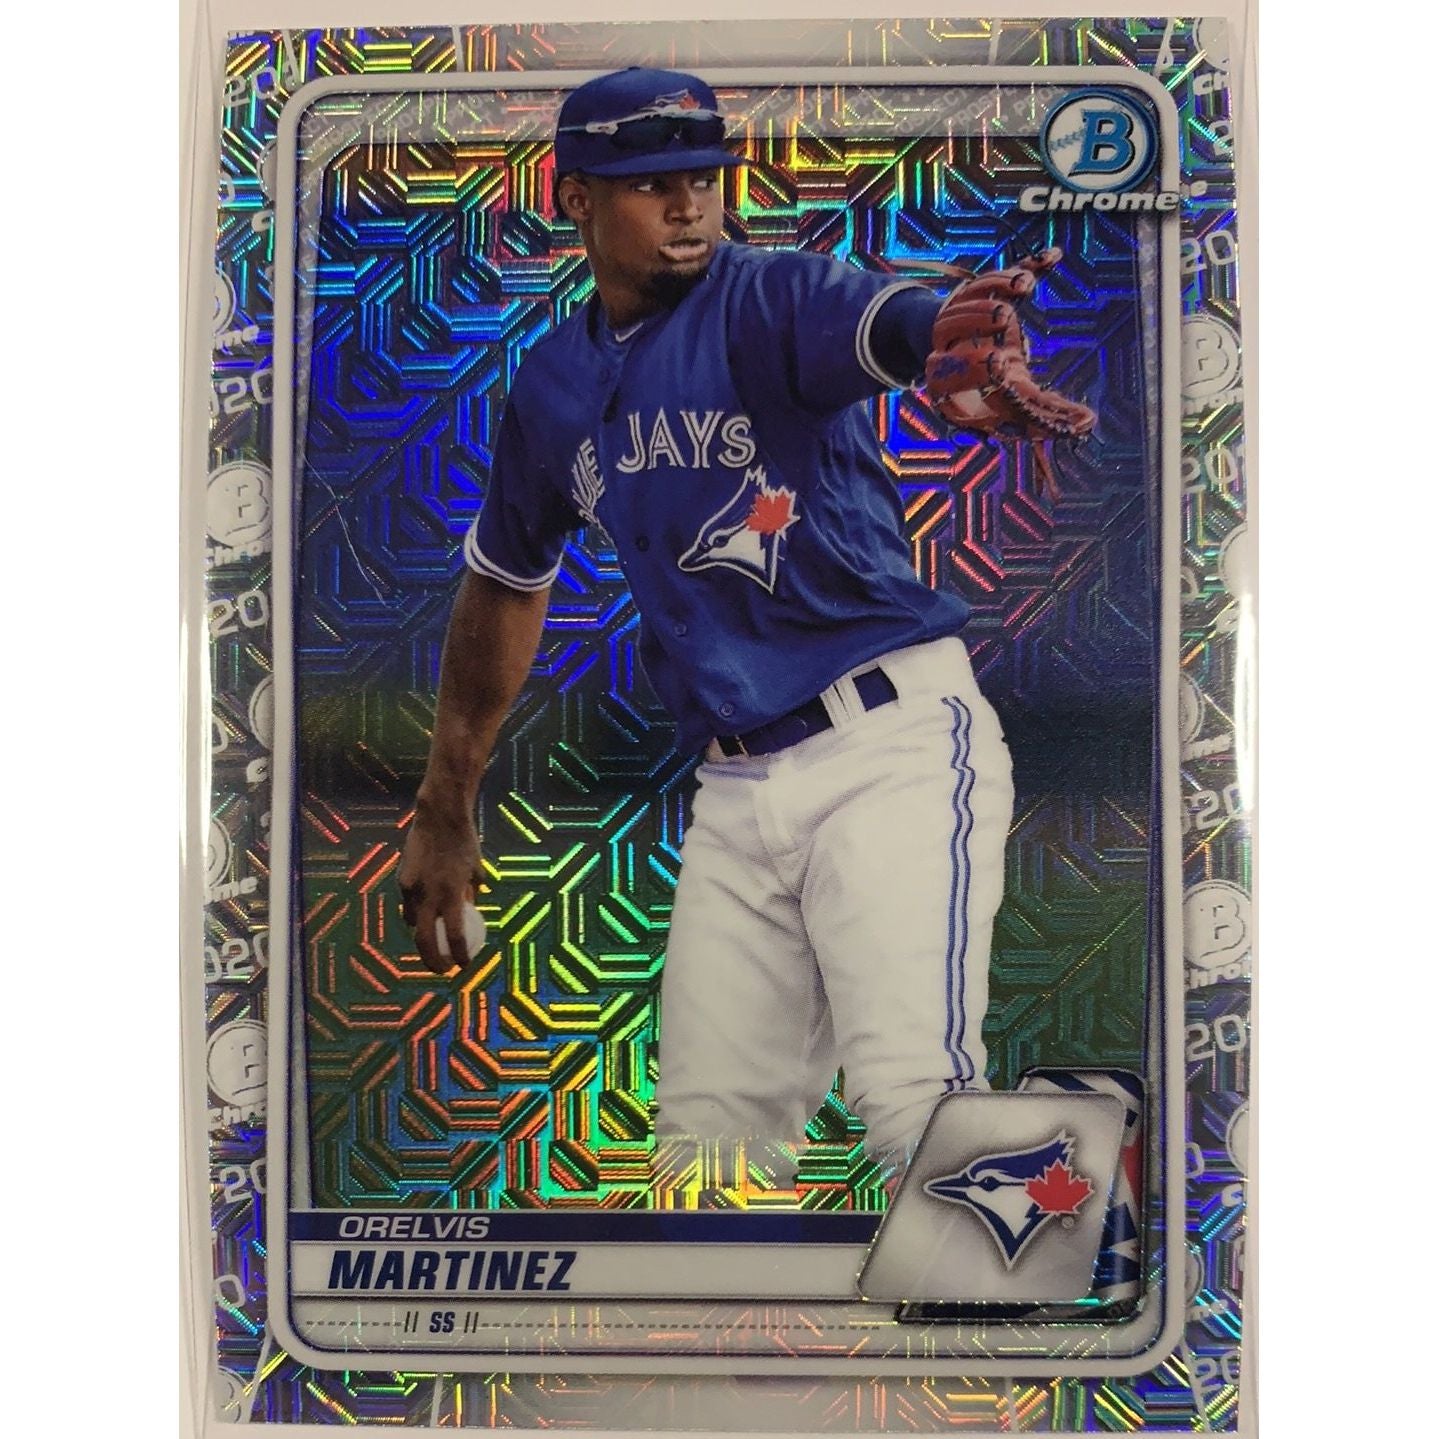  2020 Bowman Chrome Orelvis Martinez Mojo Refractor  Local Legends Cards & Collectibles